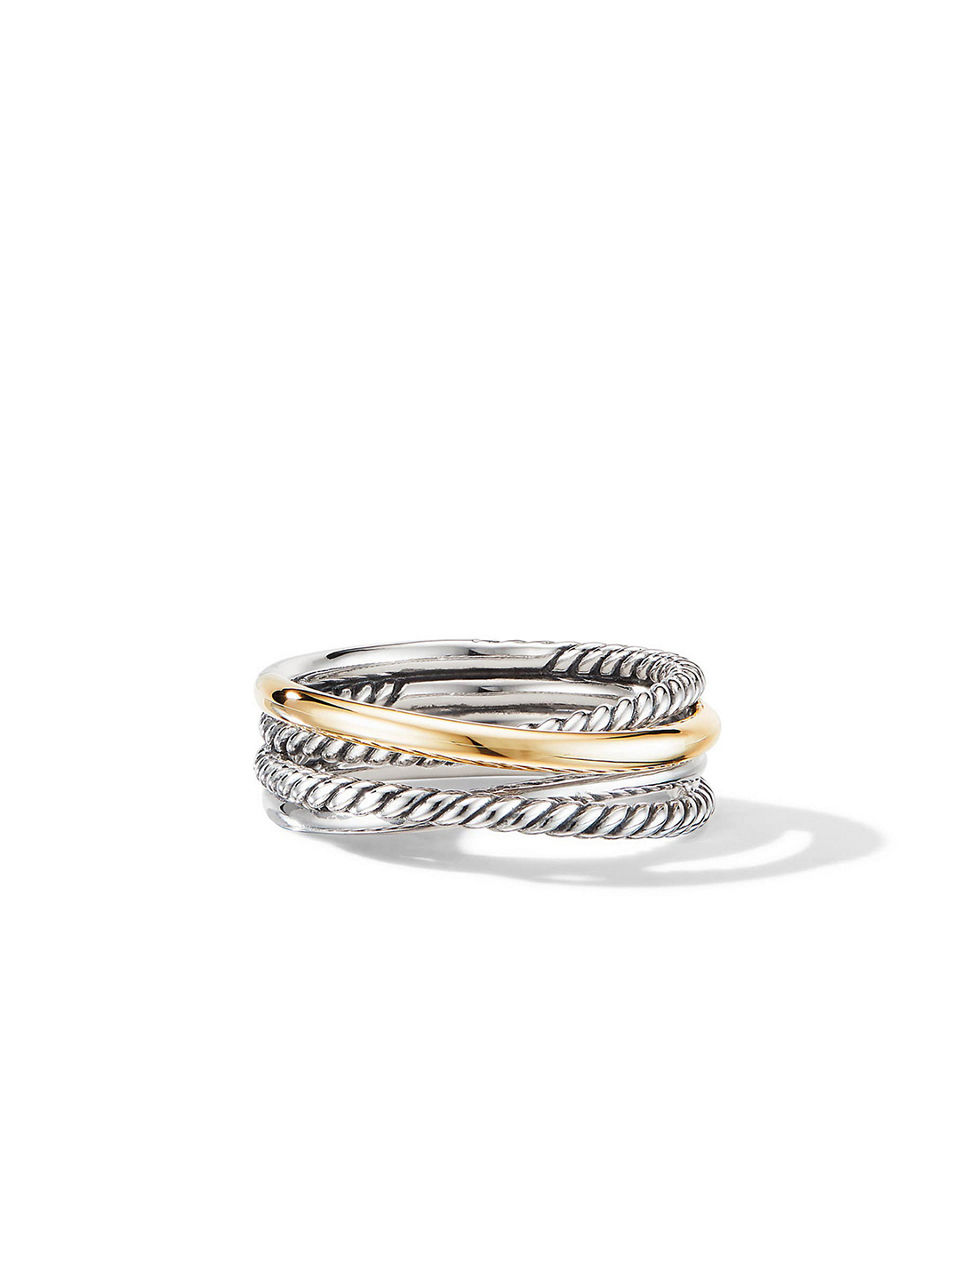 DAVID YURMAN Crossover Band Ring In Sterling Silver With 18k Yellow ...